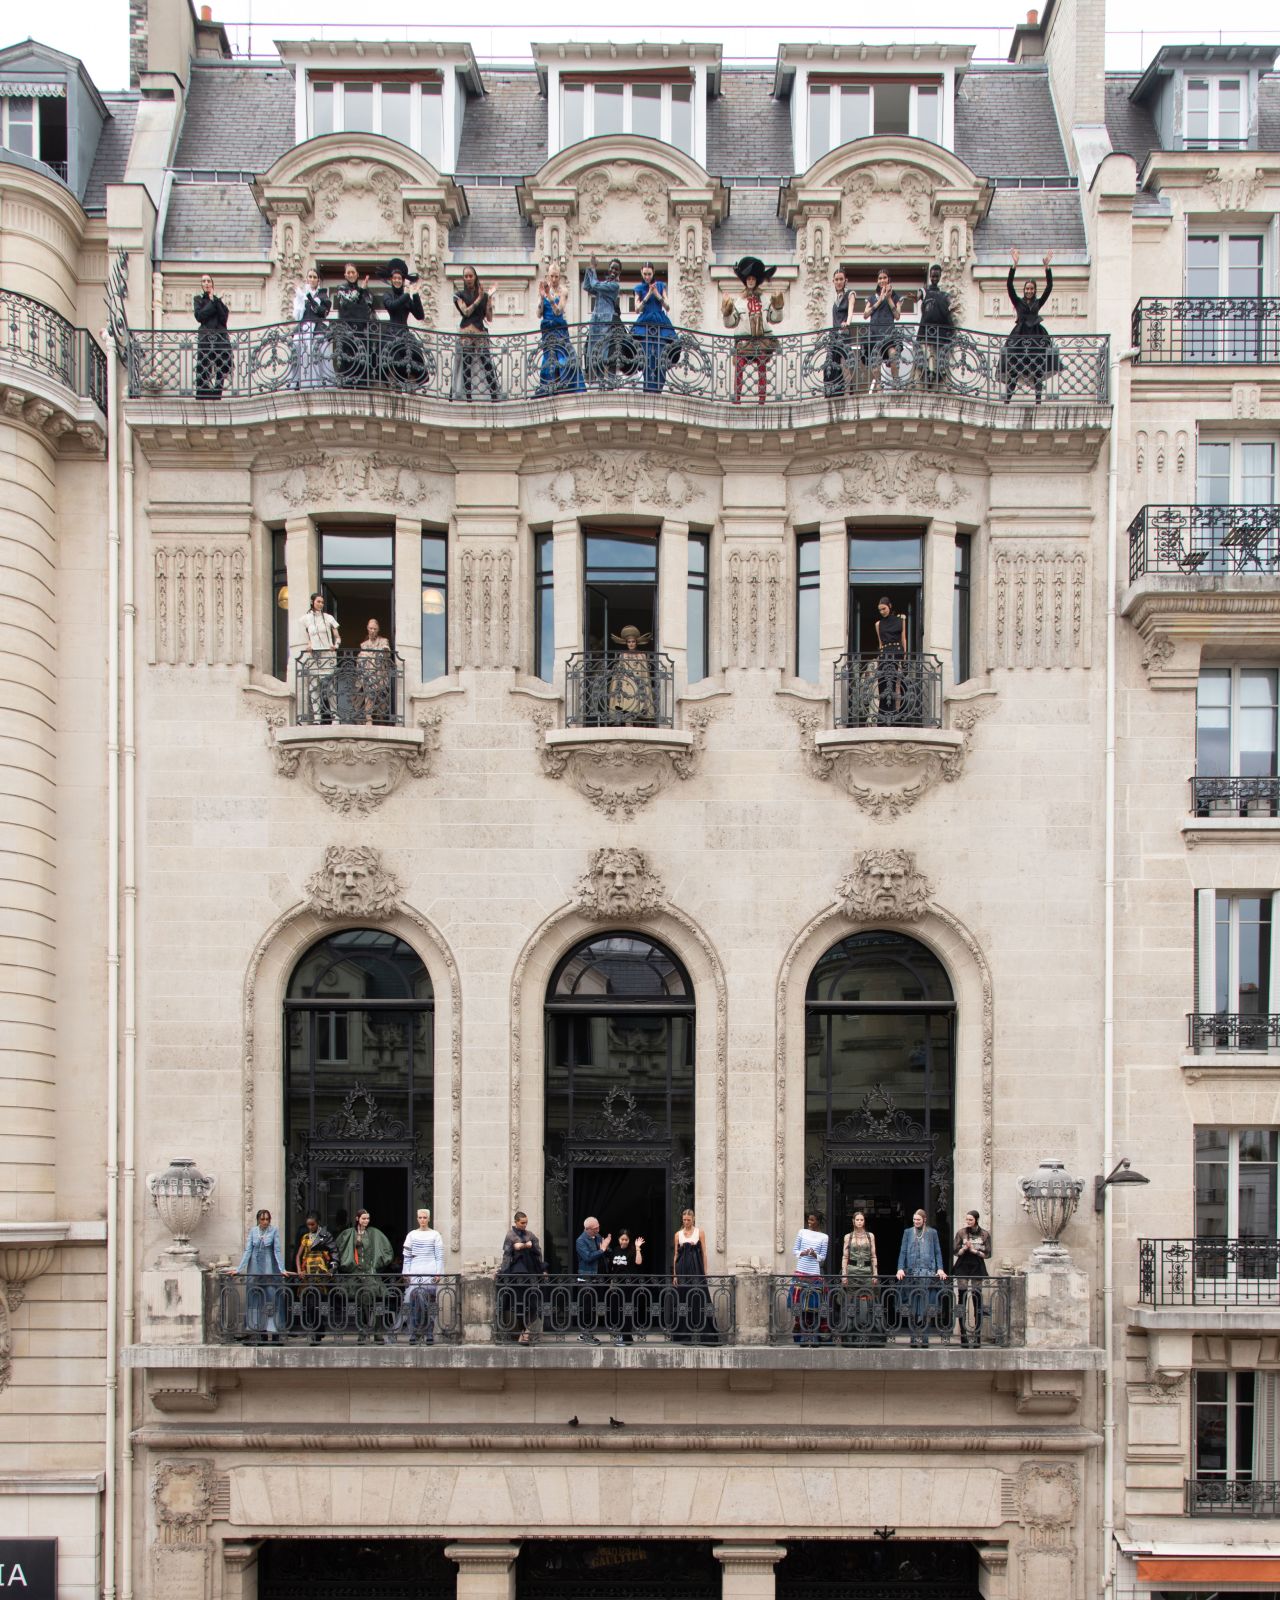 Here, Jean Paul Gaultier and models took to the balcony of the fashion house for a post-show salutation. 